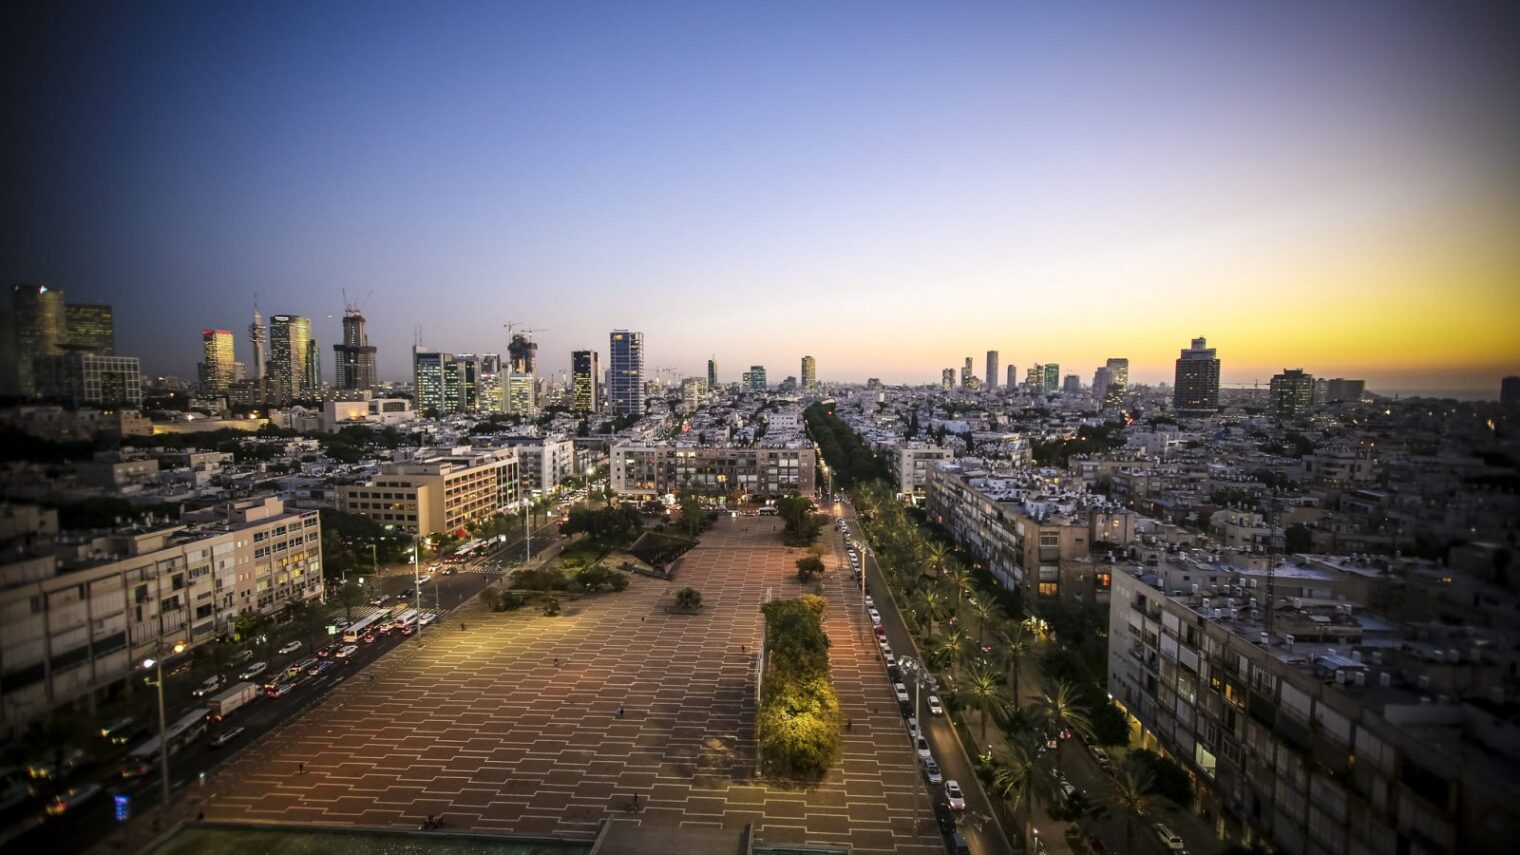 And others that look like this. The Tel Aviv skyline at dusk. Photo by Tel Aviv Municipality